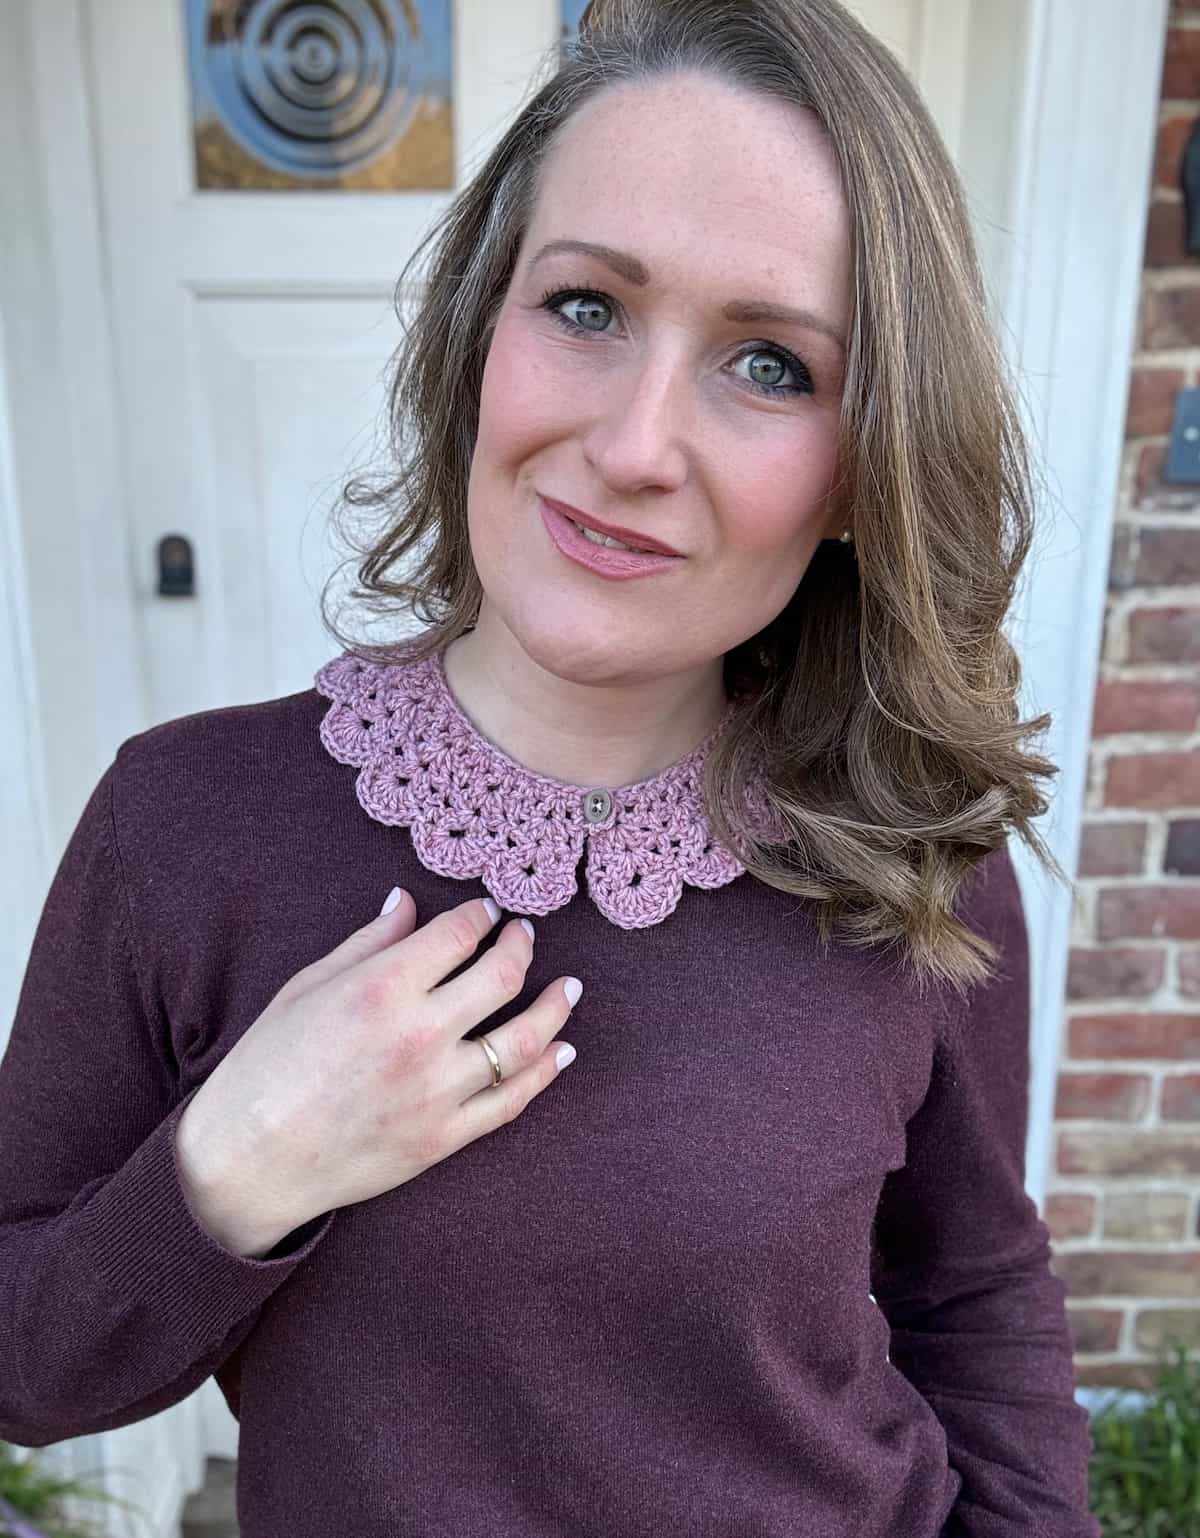 A woman wearing a burgundy sweater with a crochet collar.